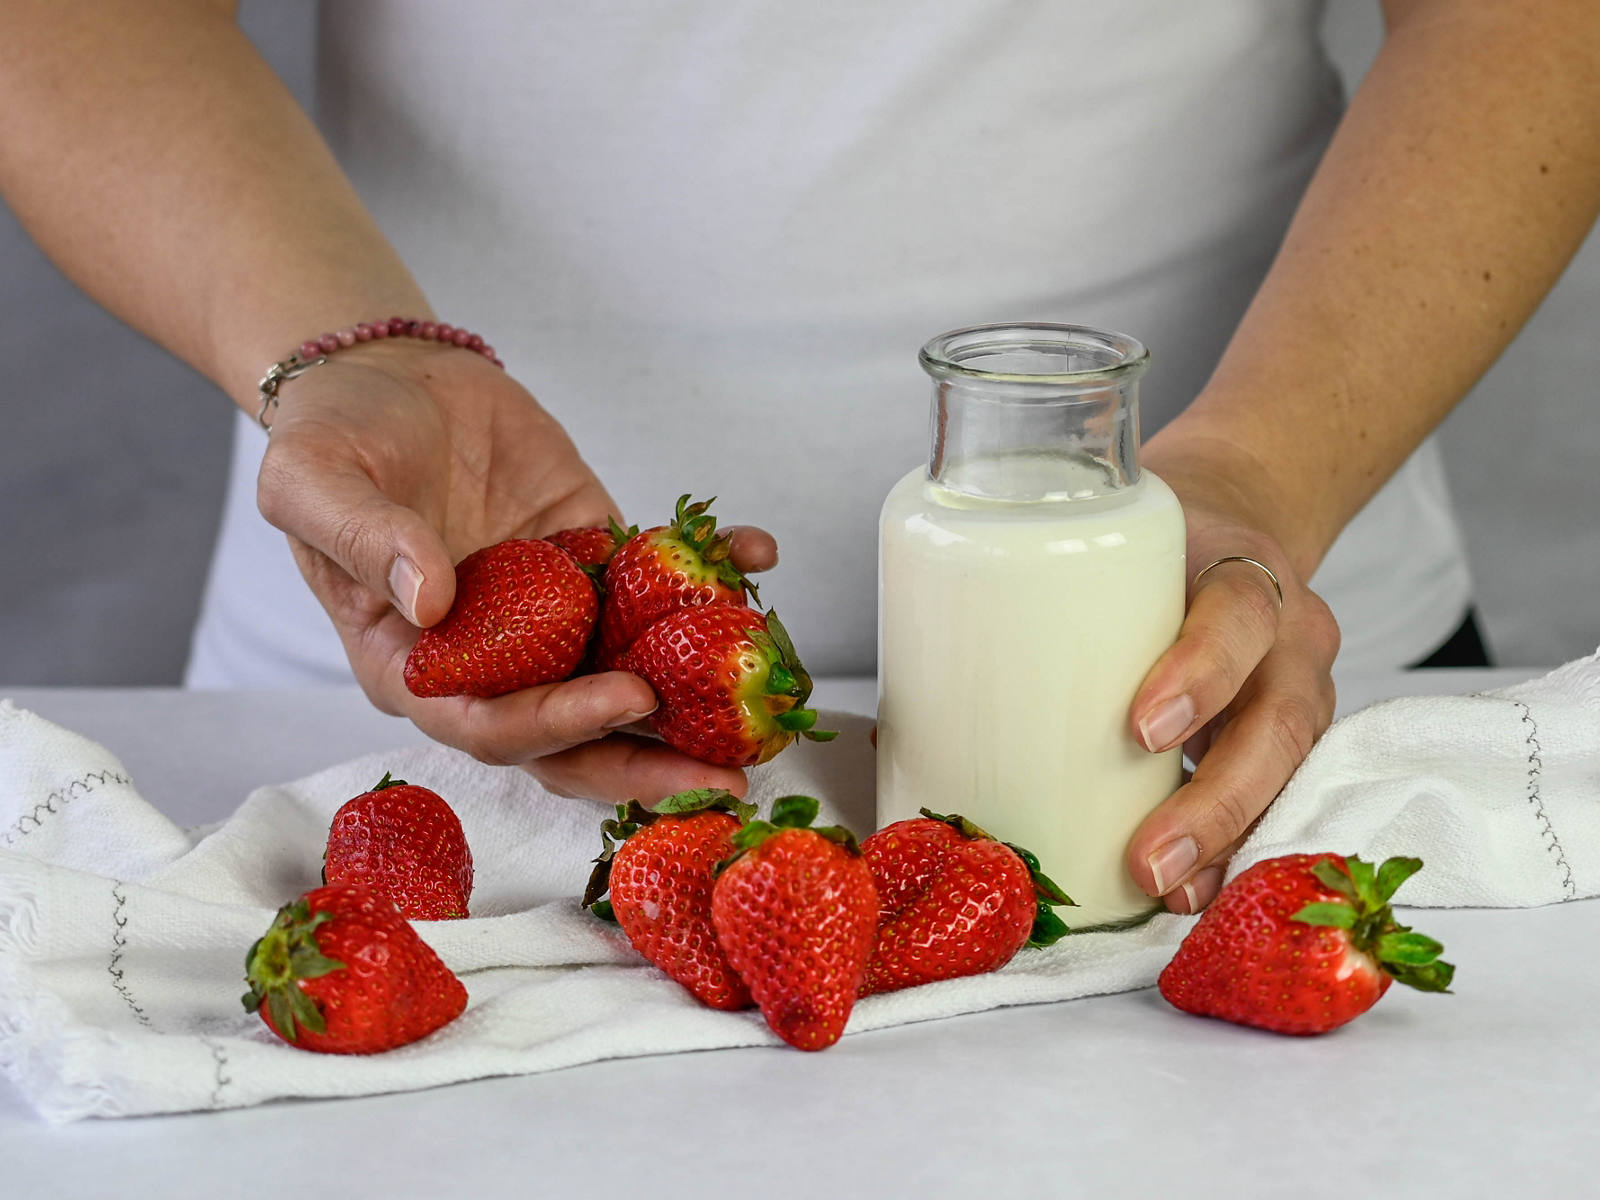 Make your own strawberry-coconut ice cream: Main ingredients